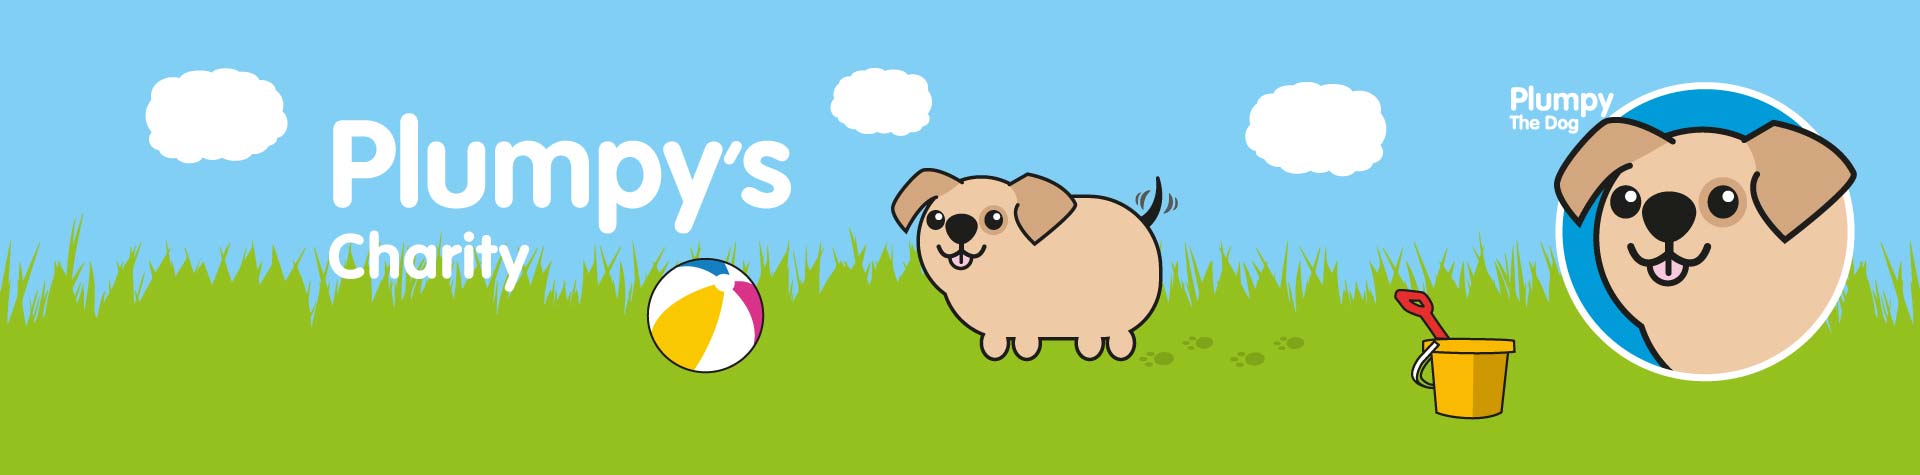 Decorative banner of Plumpy The Dog Charity header